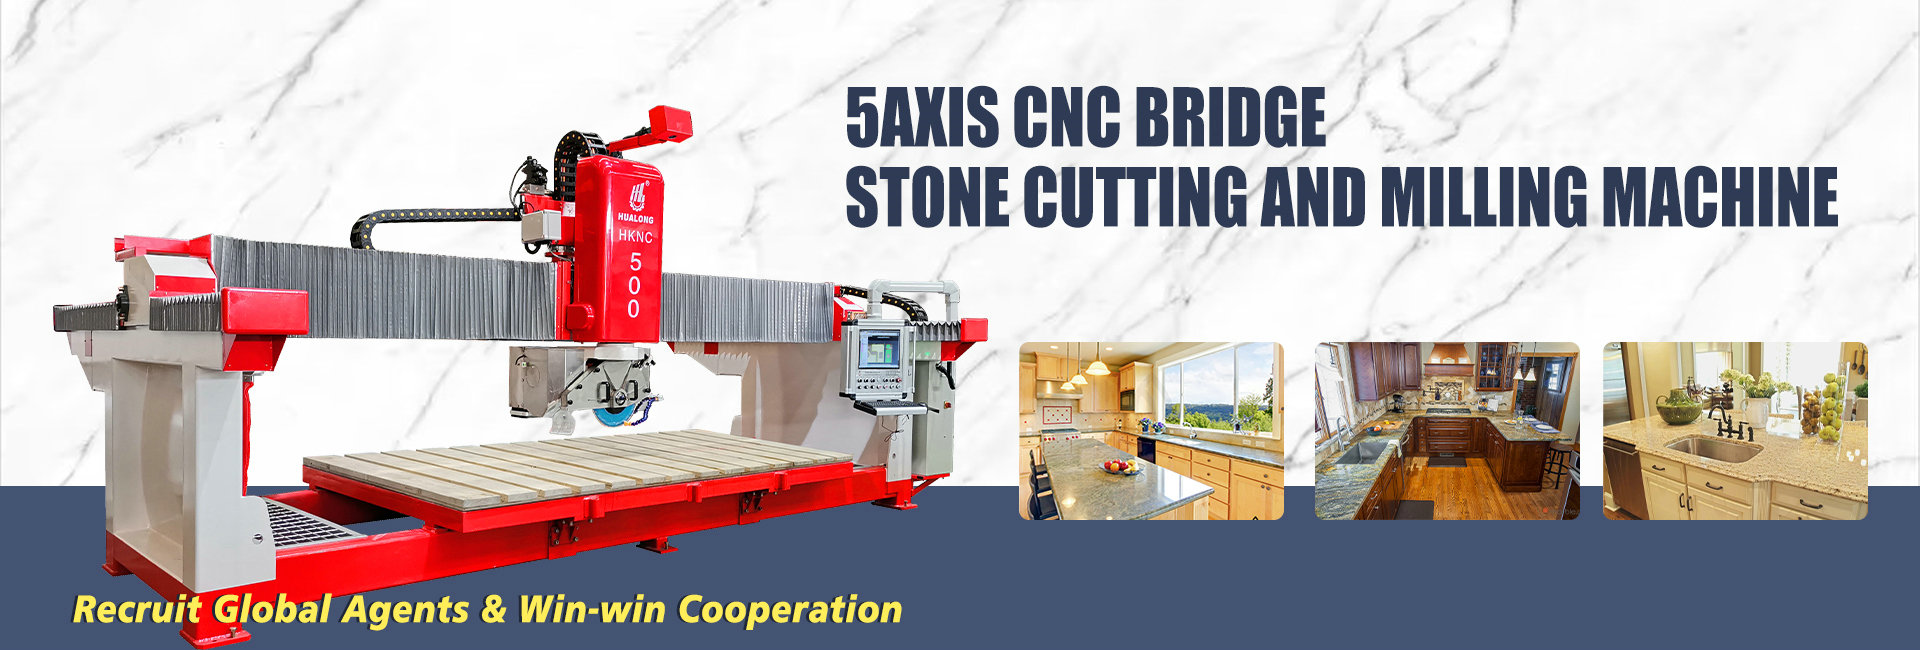 What Are The Advantages of Using Machine Cut Stones?